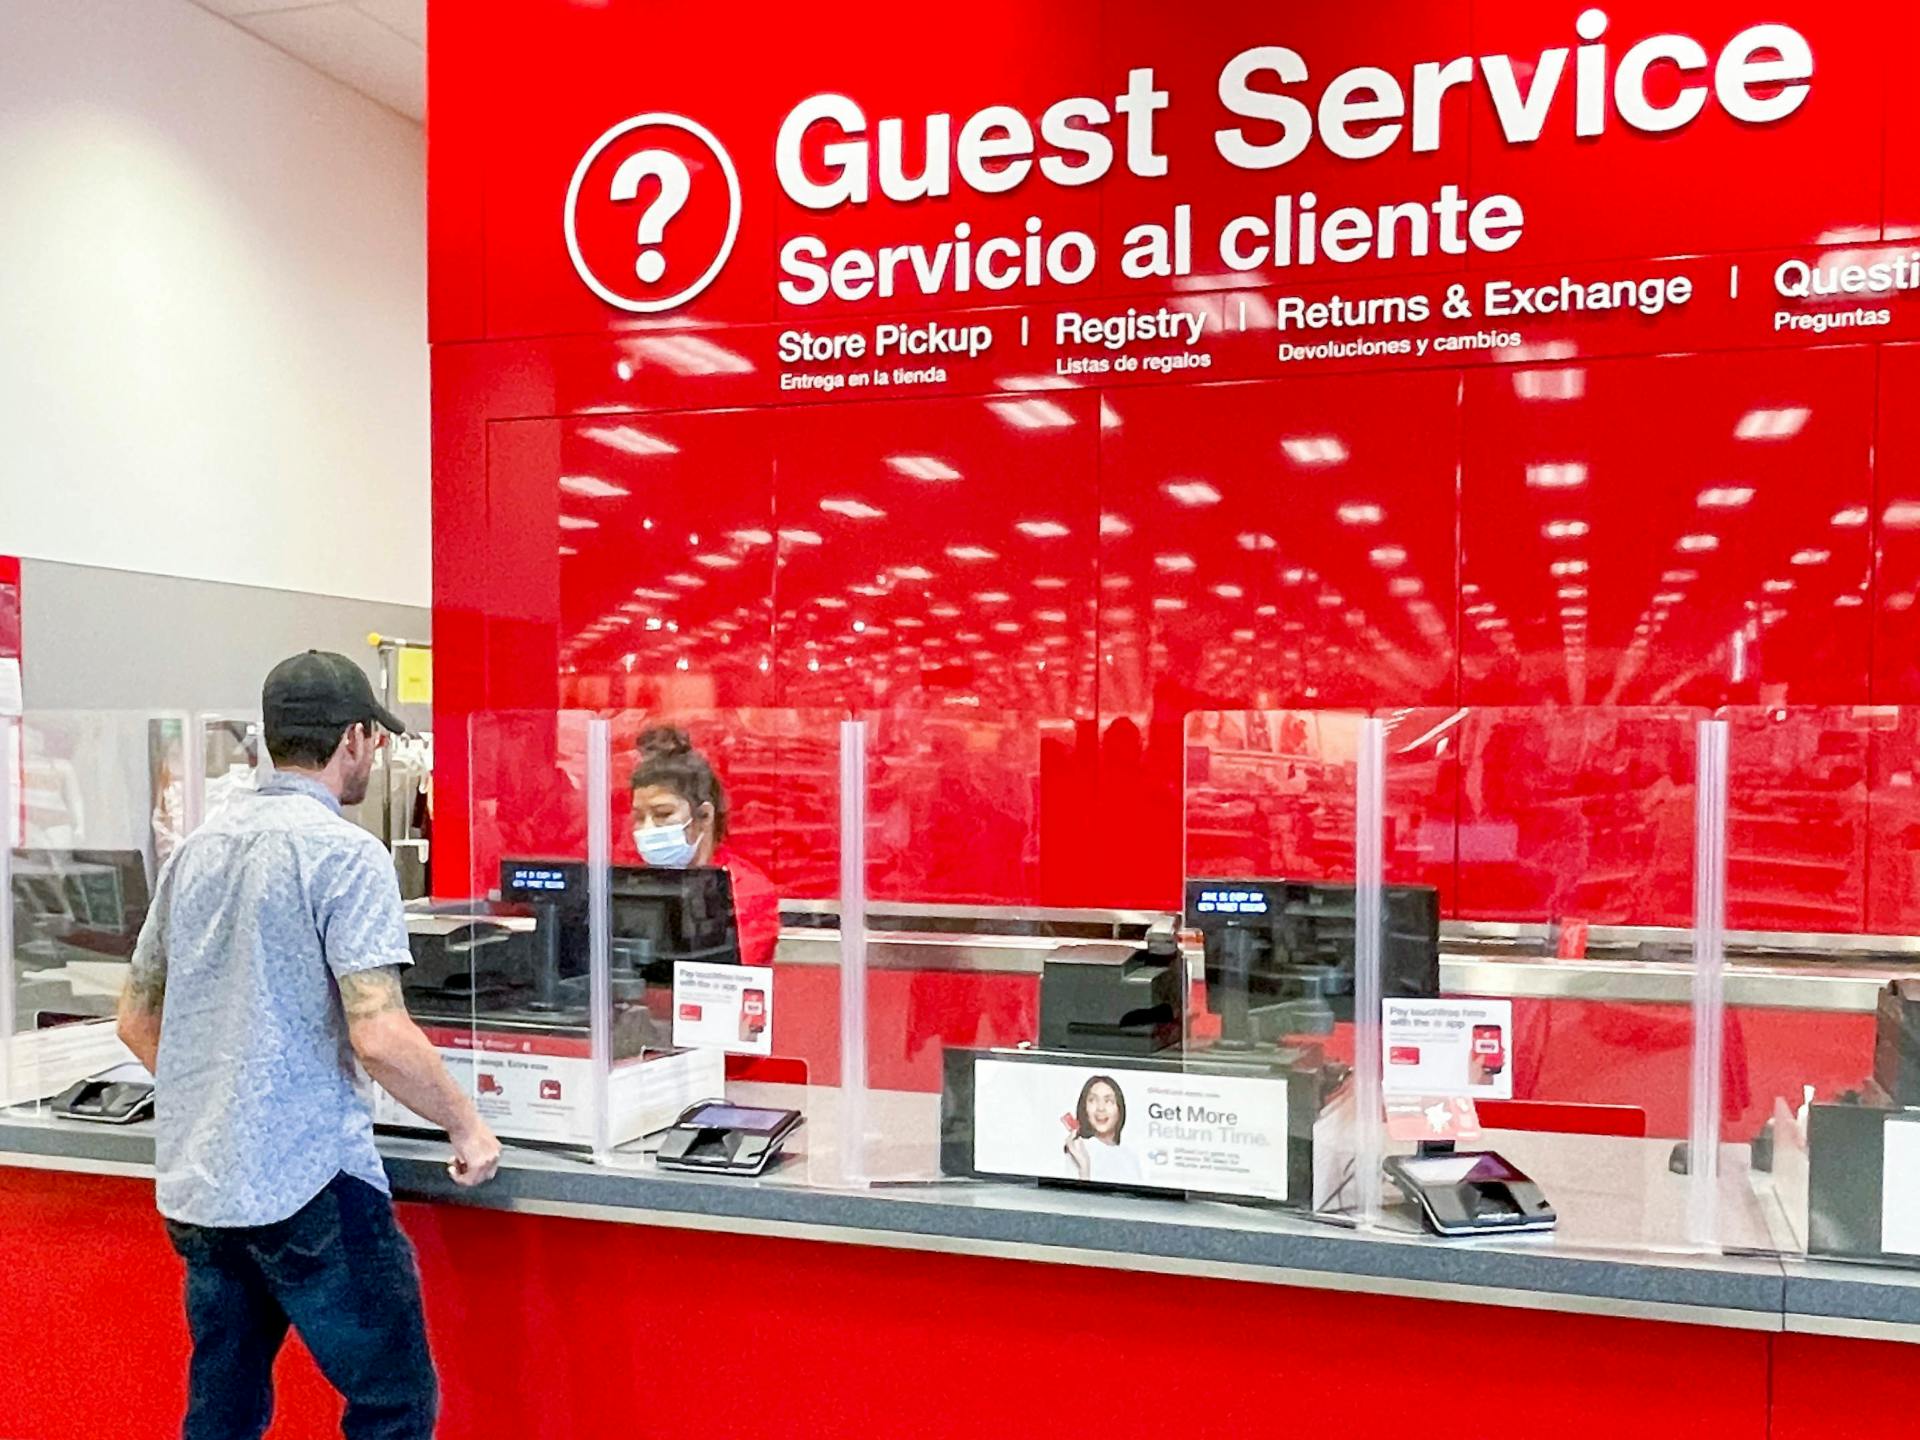 A man talking to an employee at the Target guest service counter.